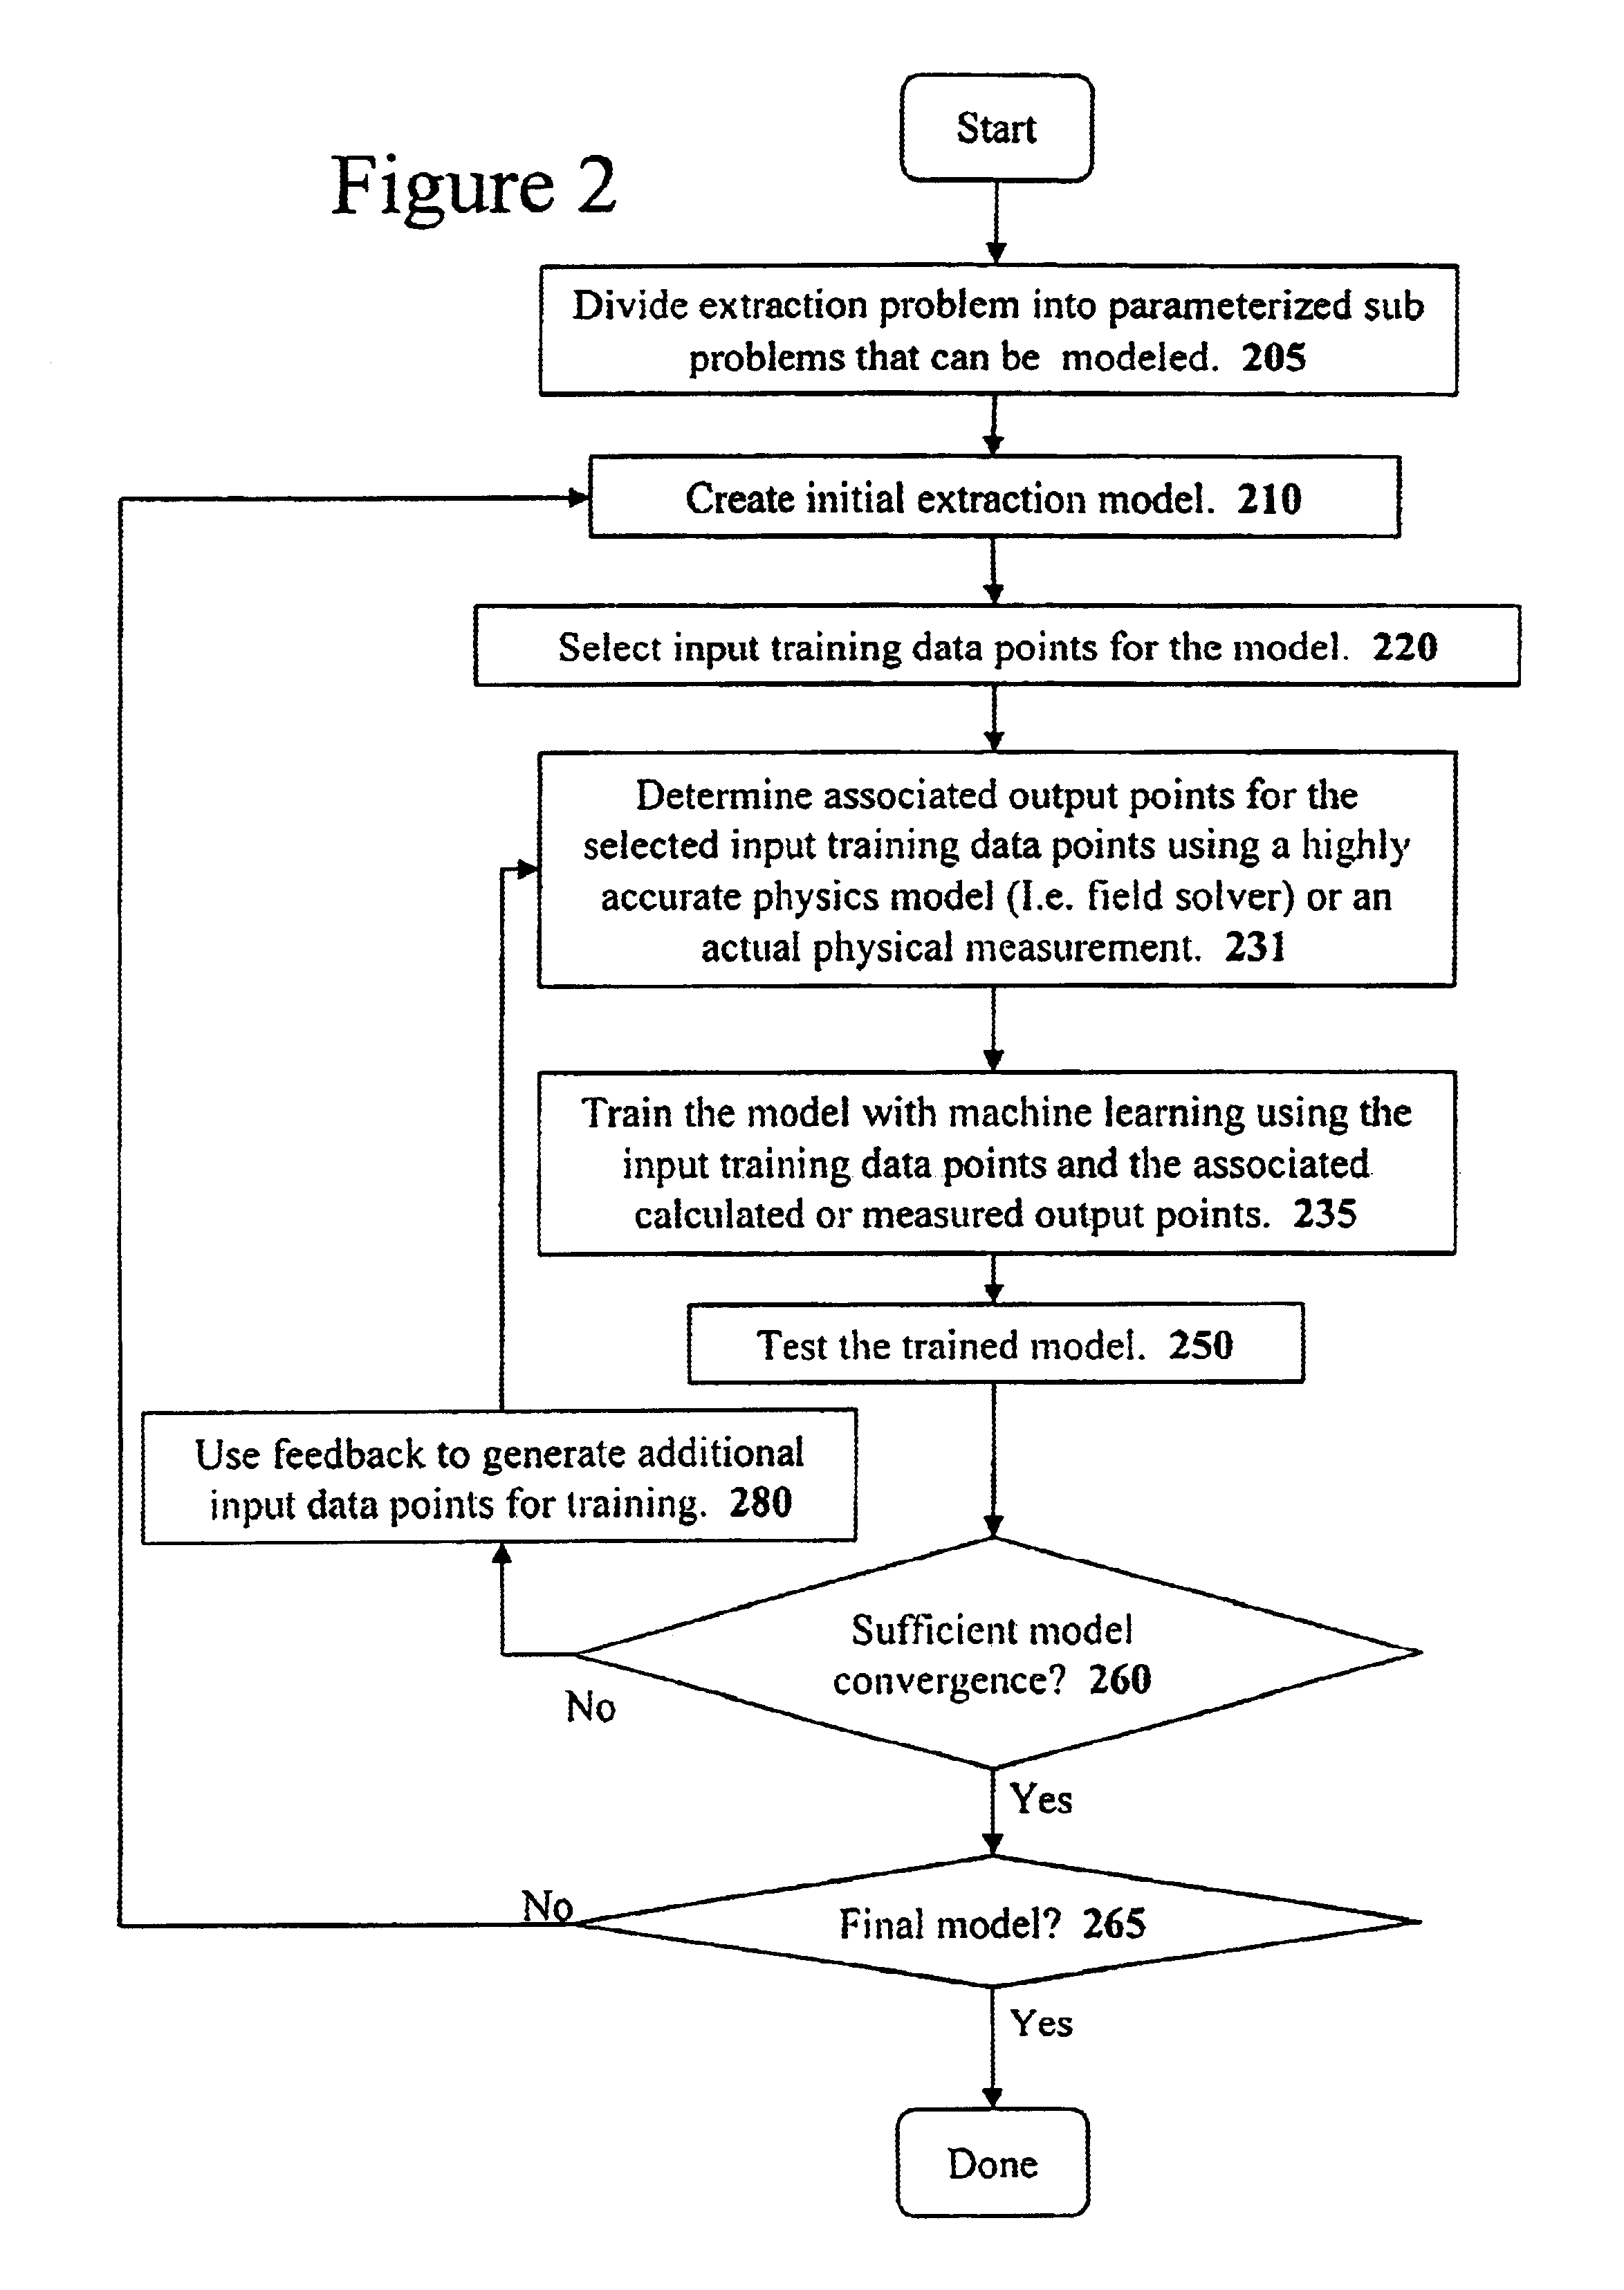 Method and apparatus for creating an extraction model using Bayesian inference